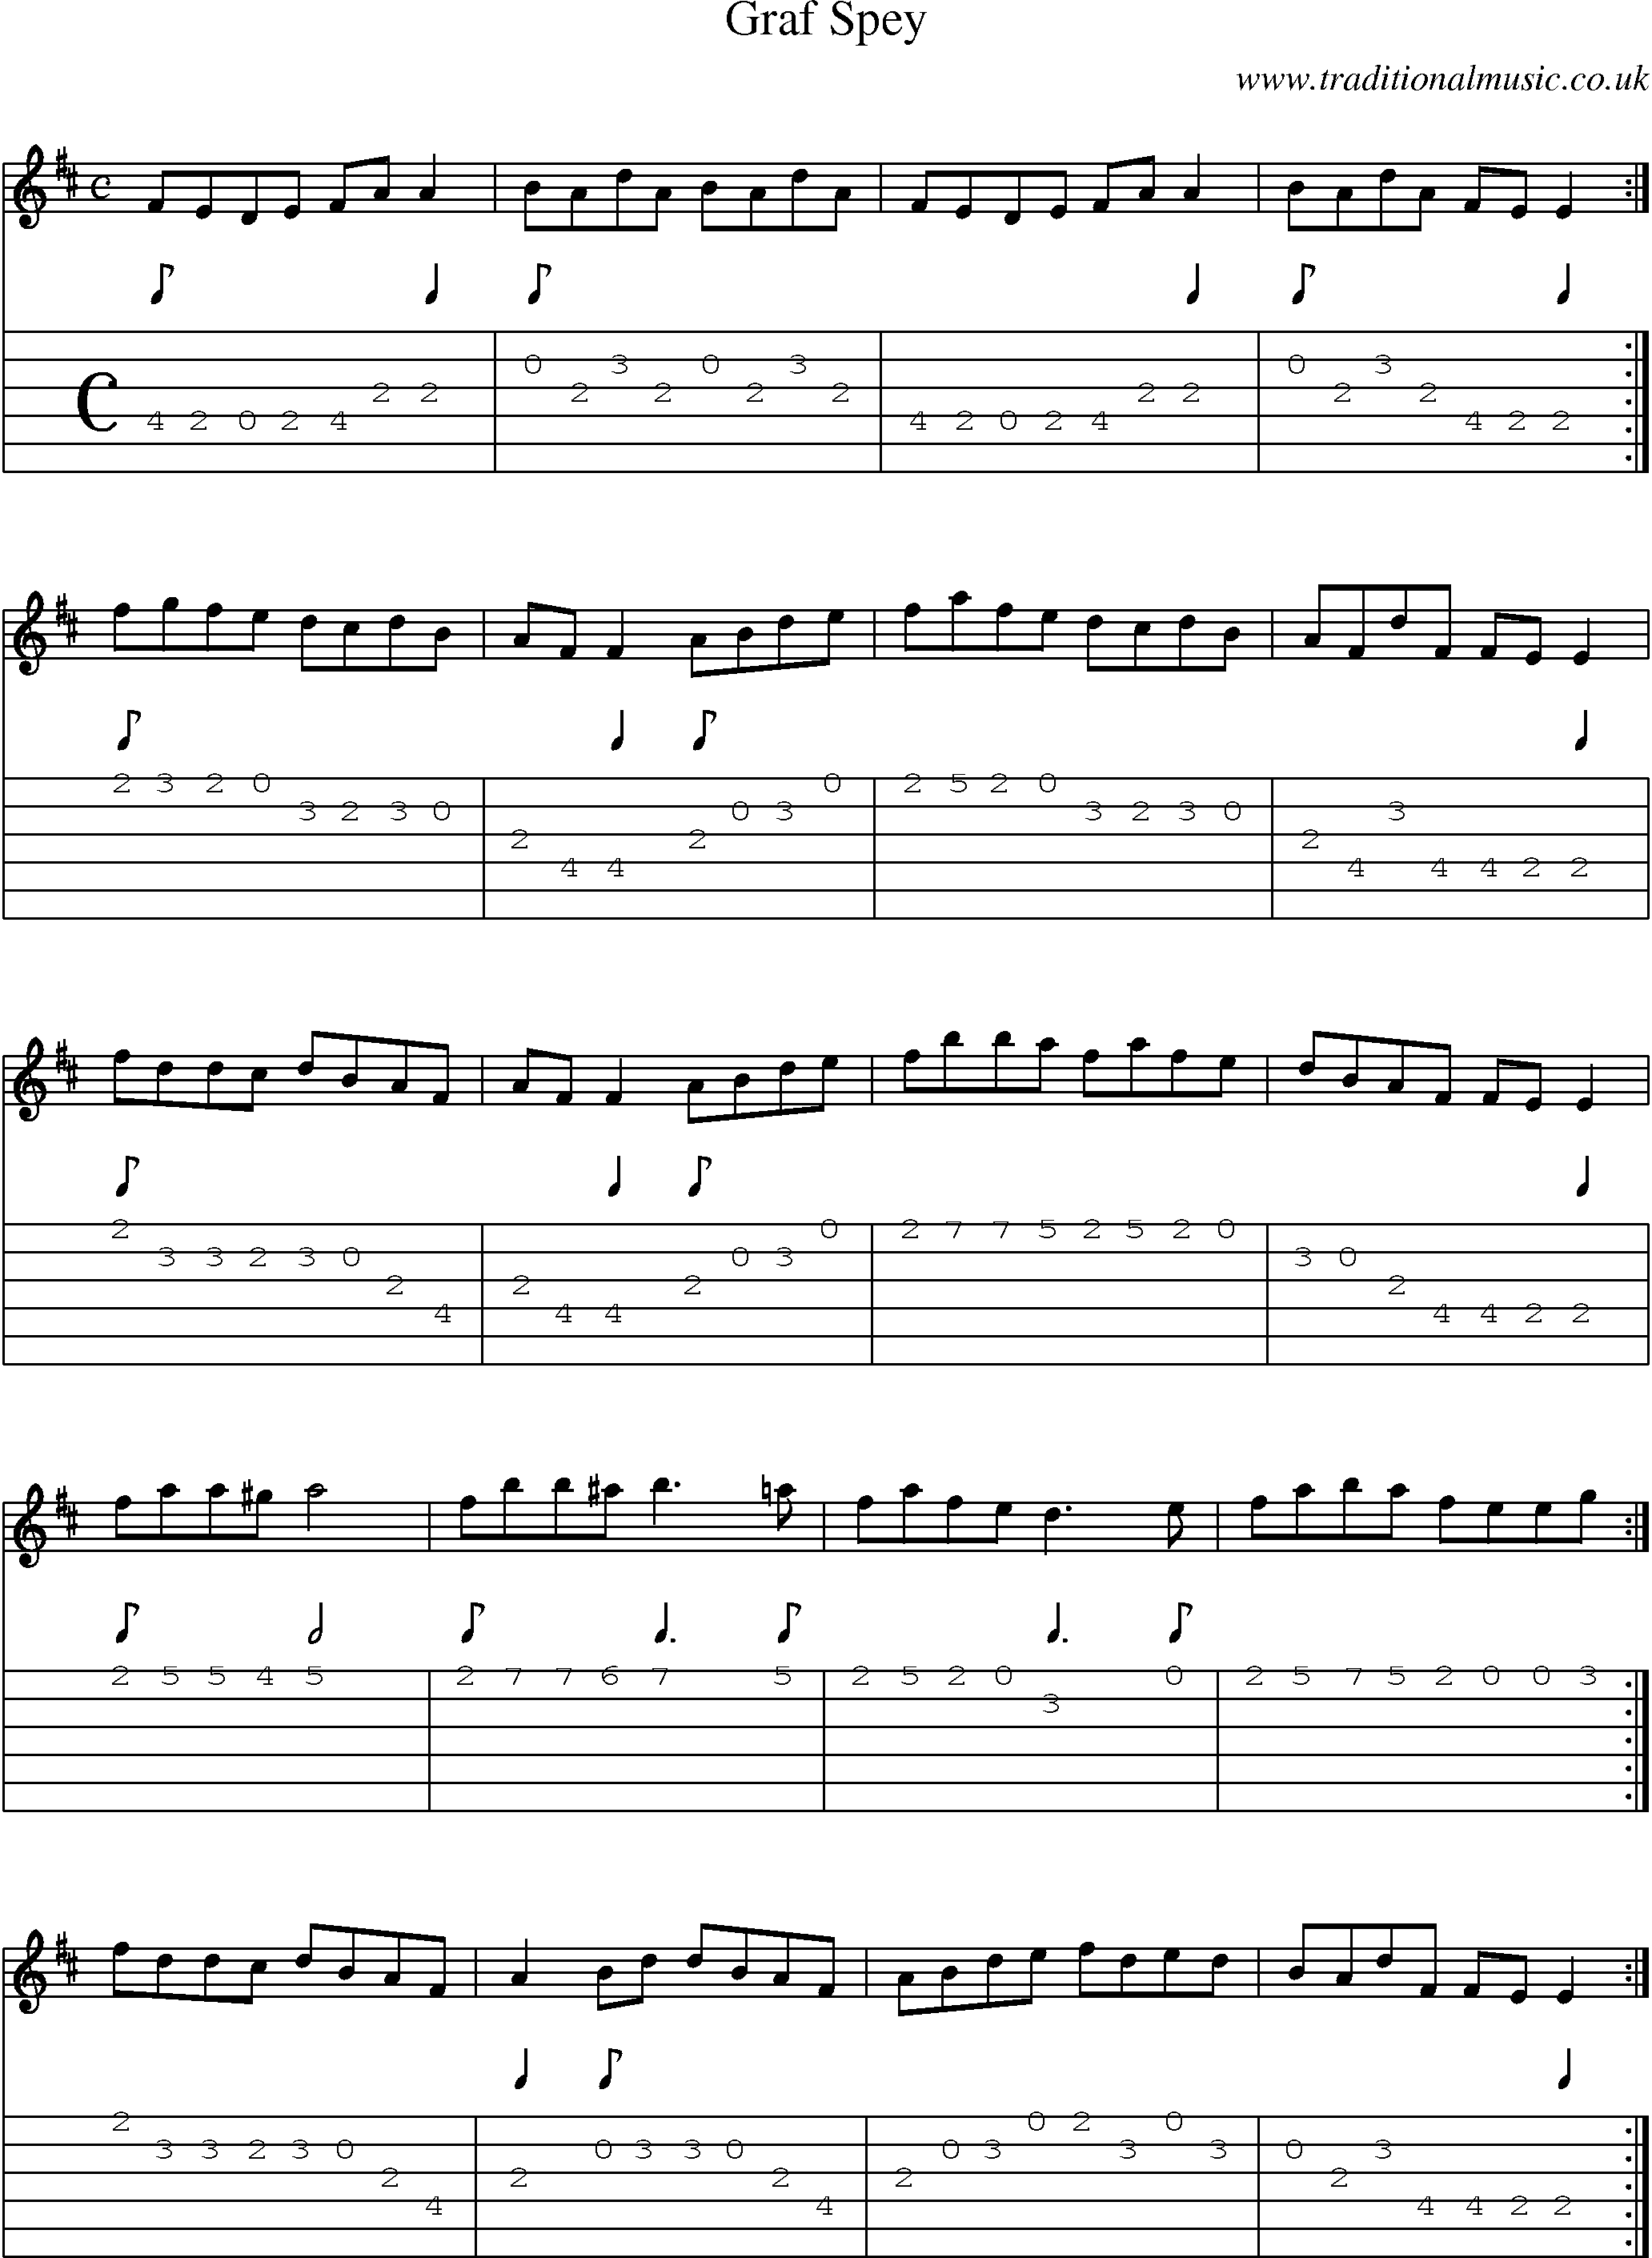 Music Score and Guitar Tabs for Graf Spey